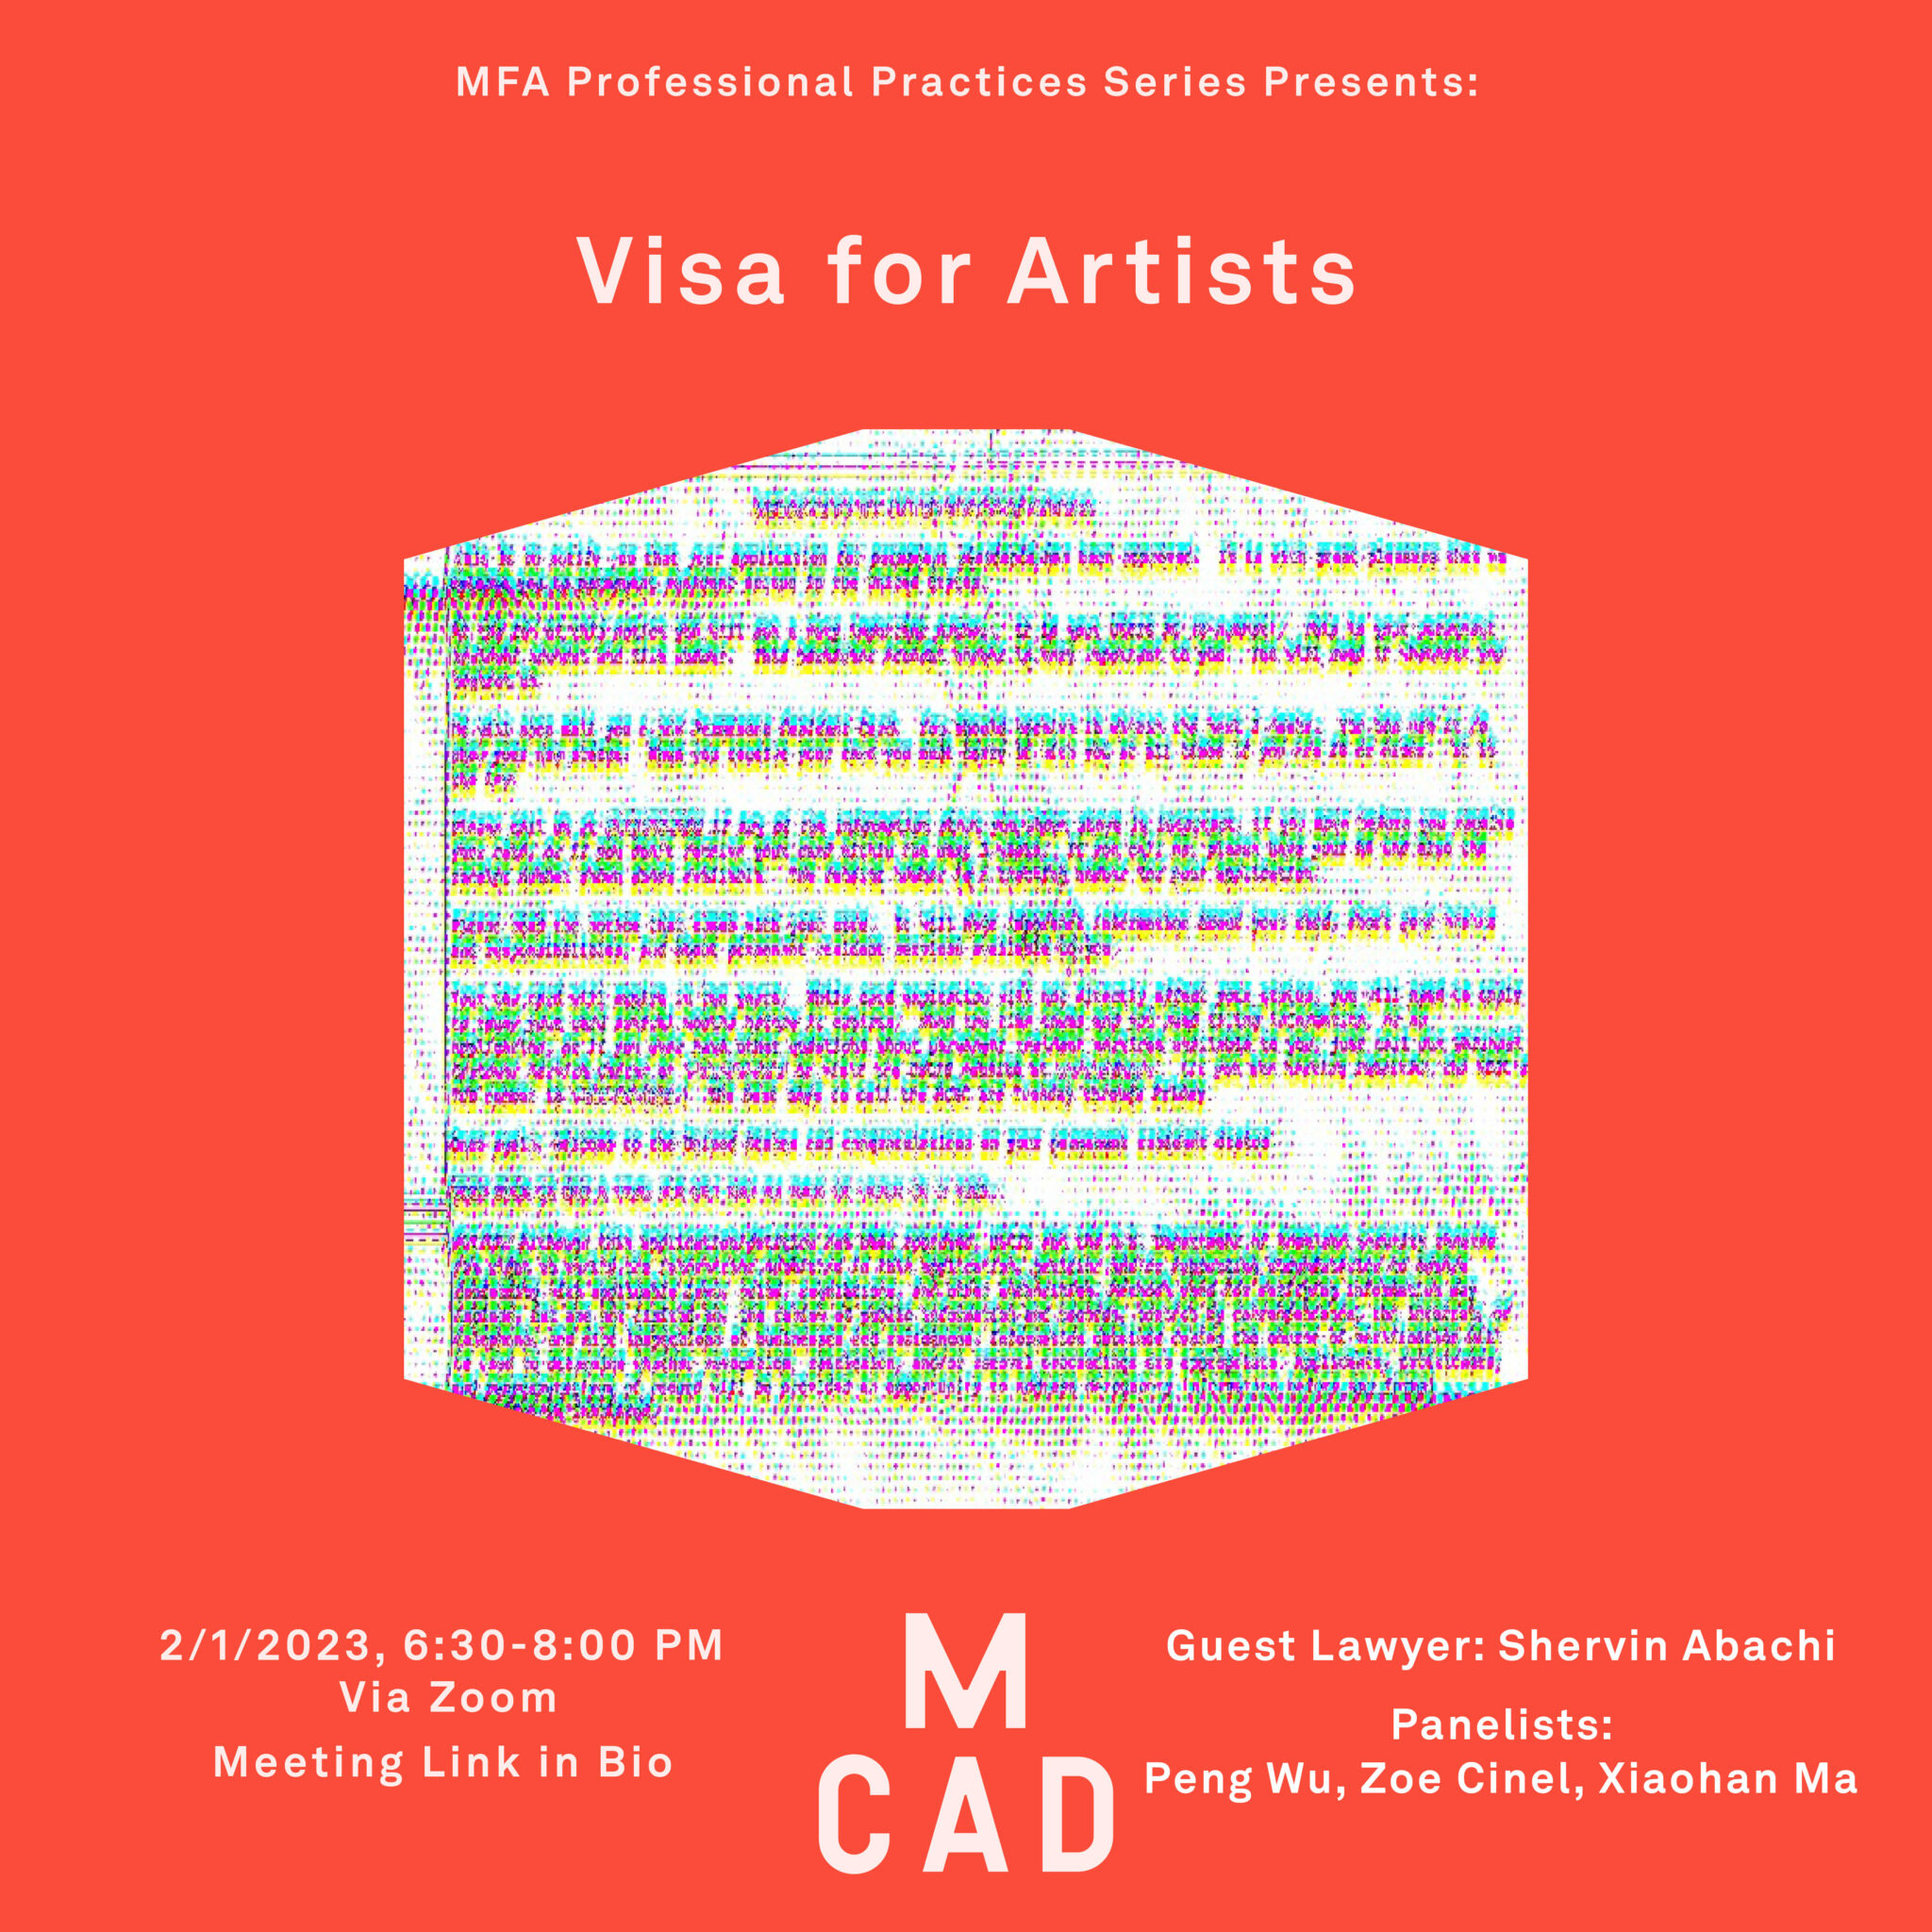 Professional Practices Series: Visa for Artists